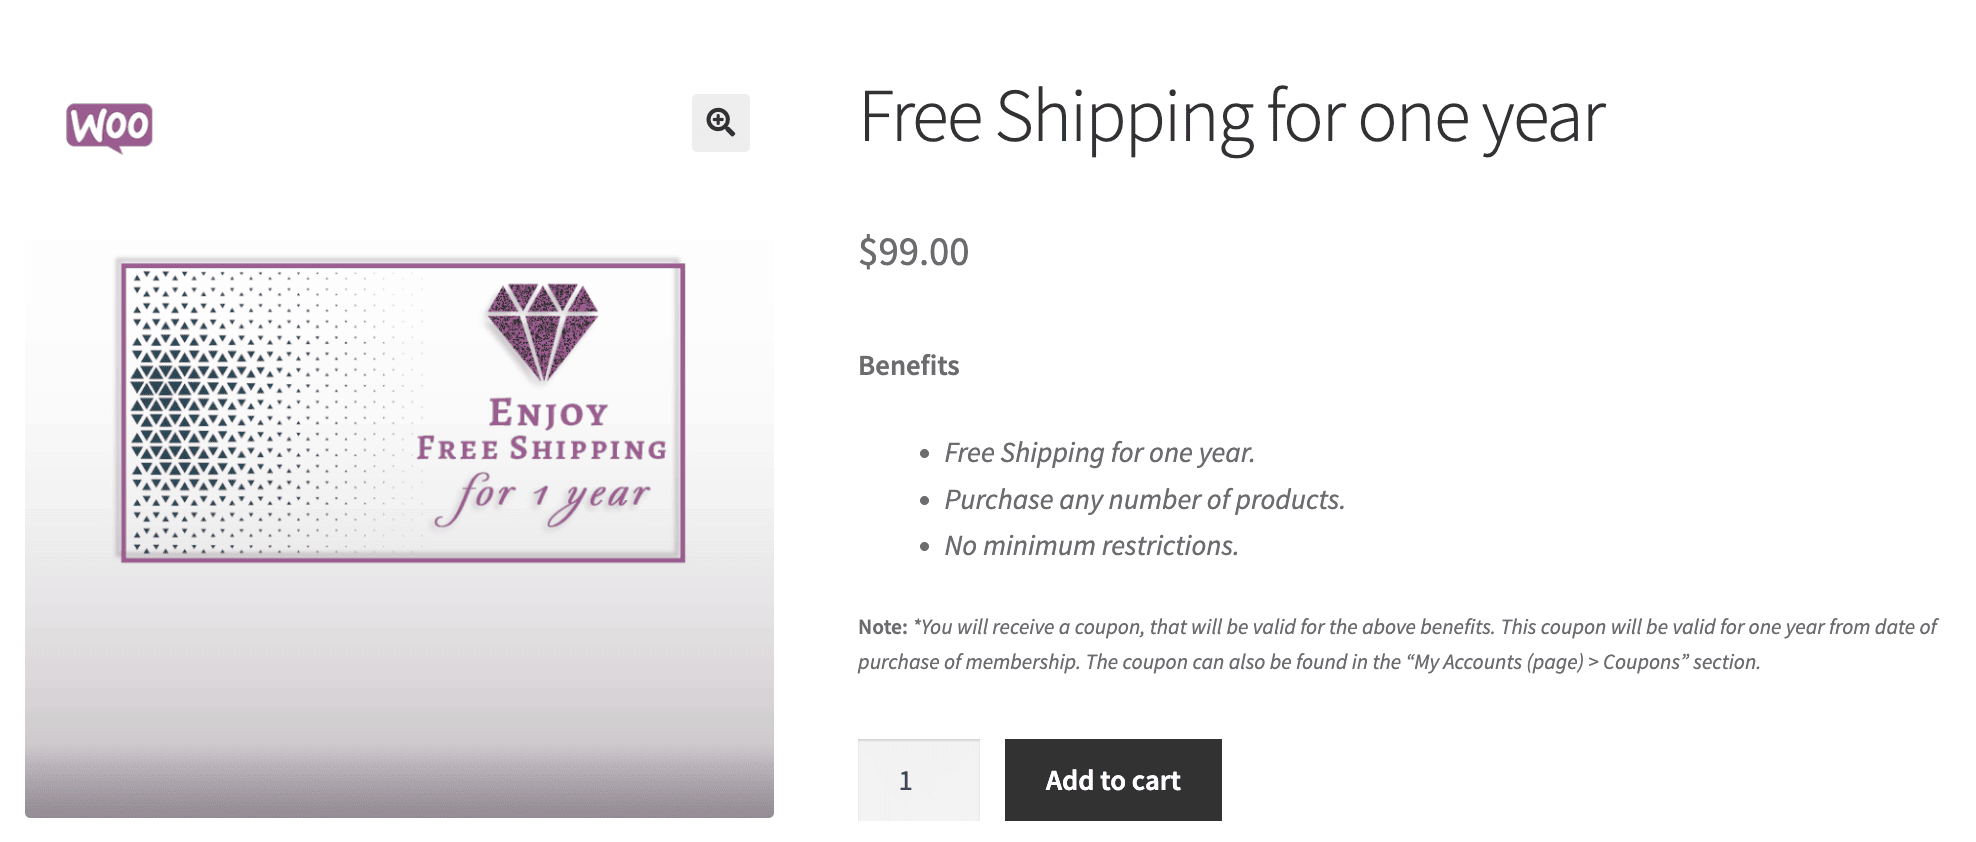 woocommerce free shipping for one year product